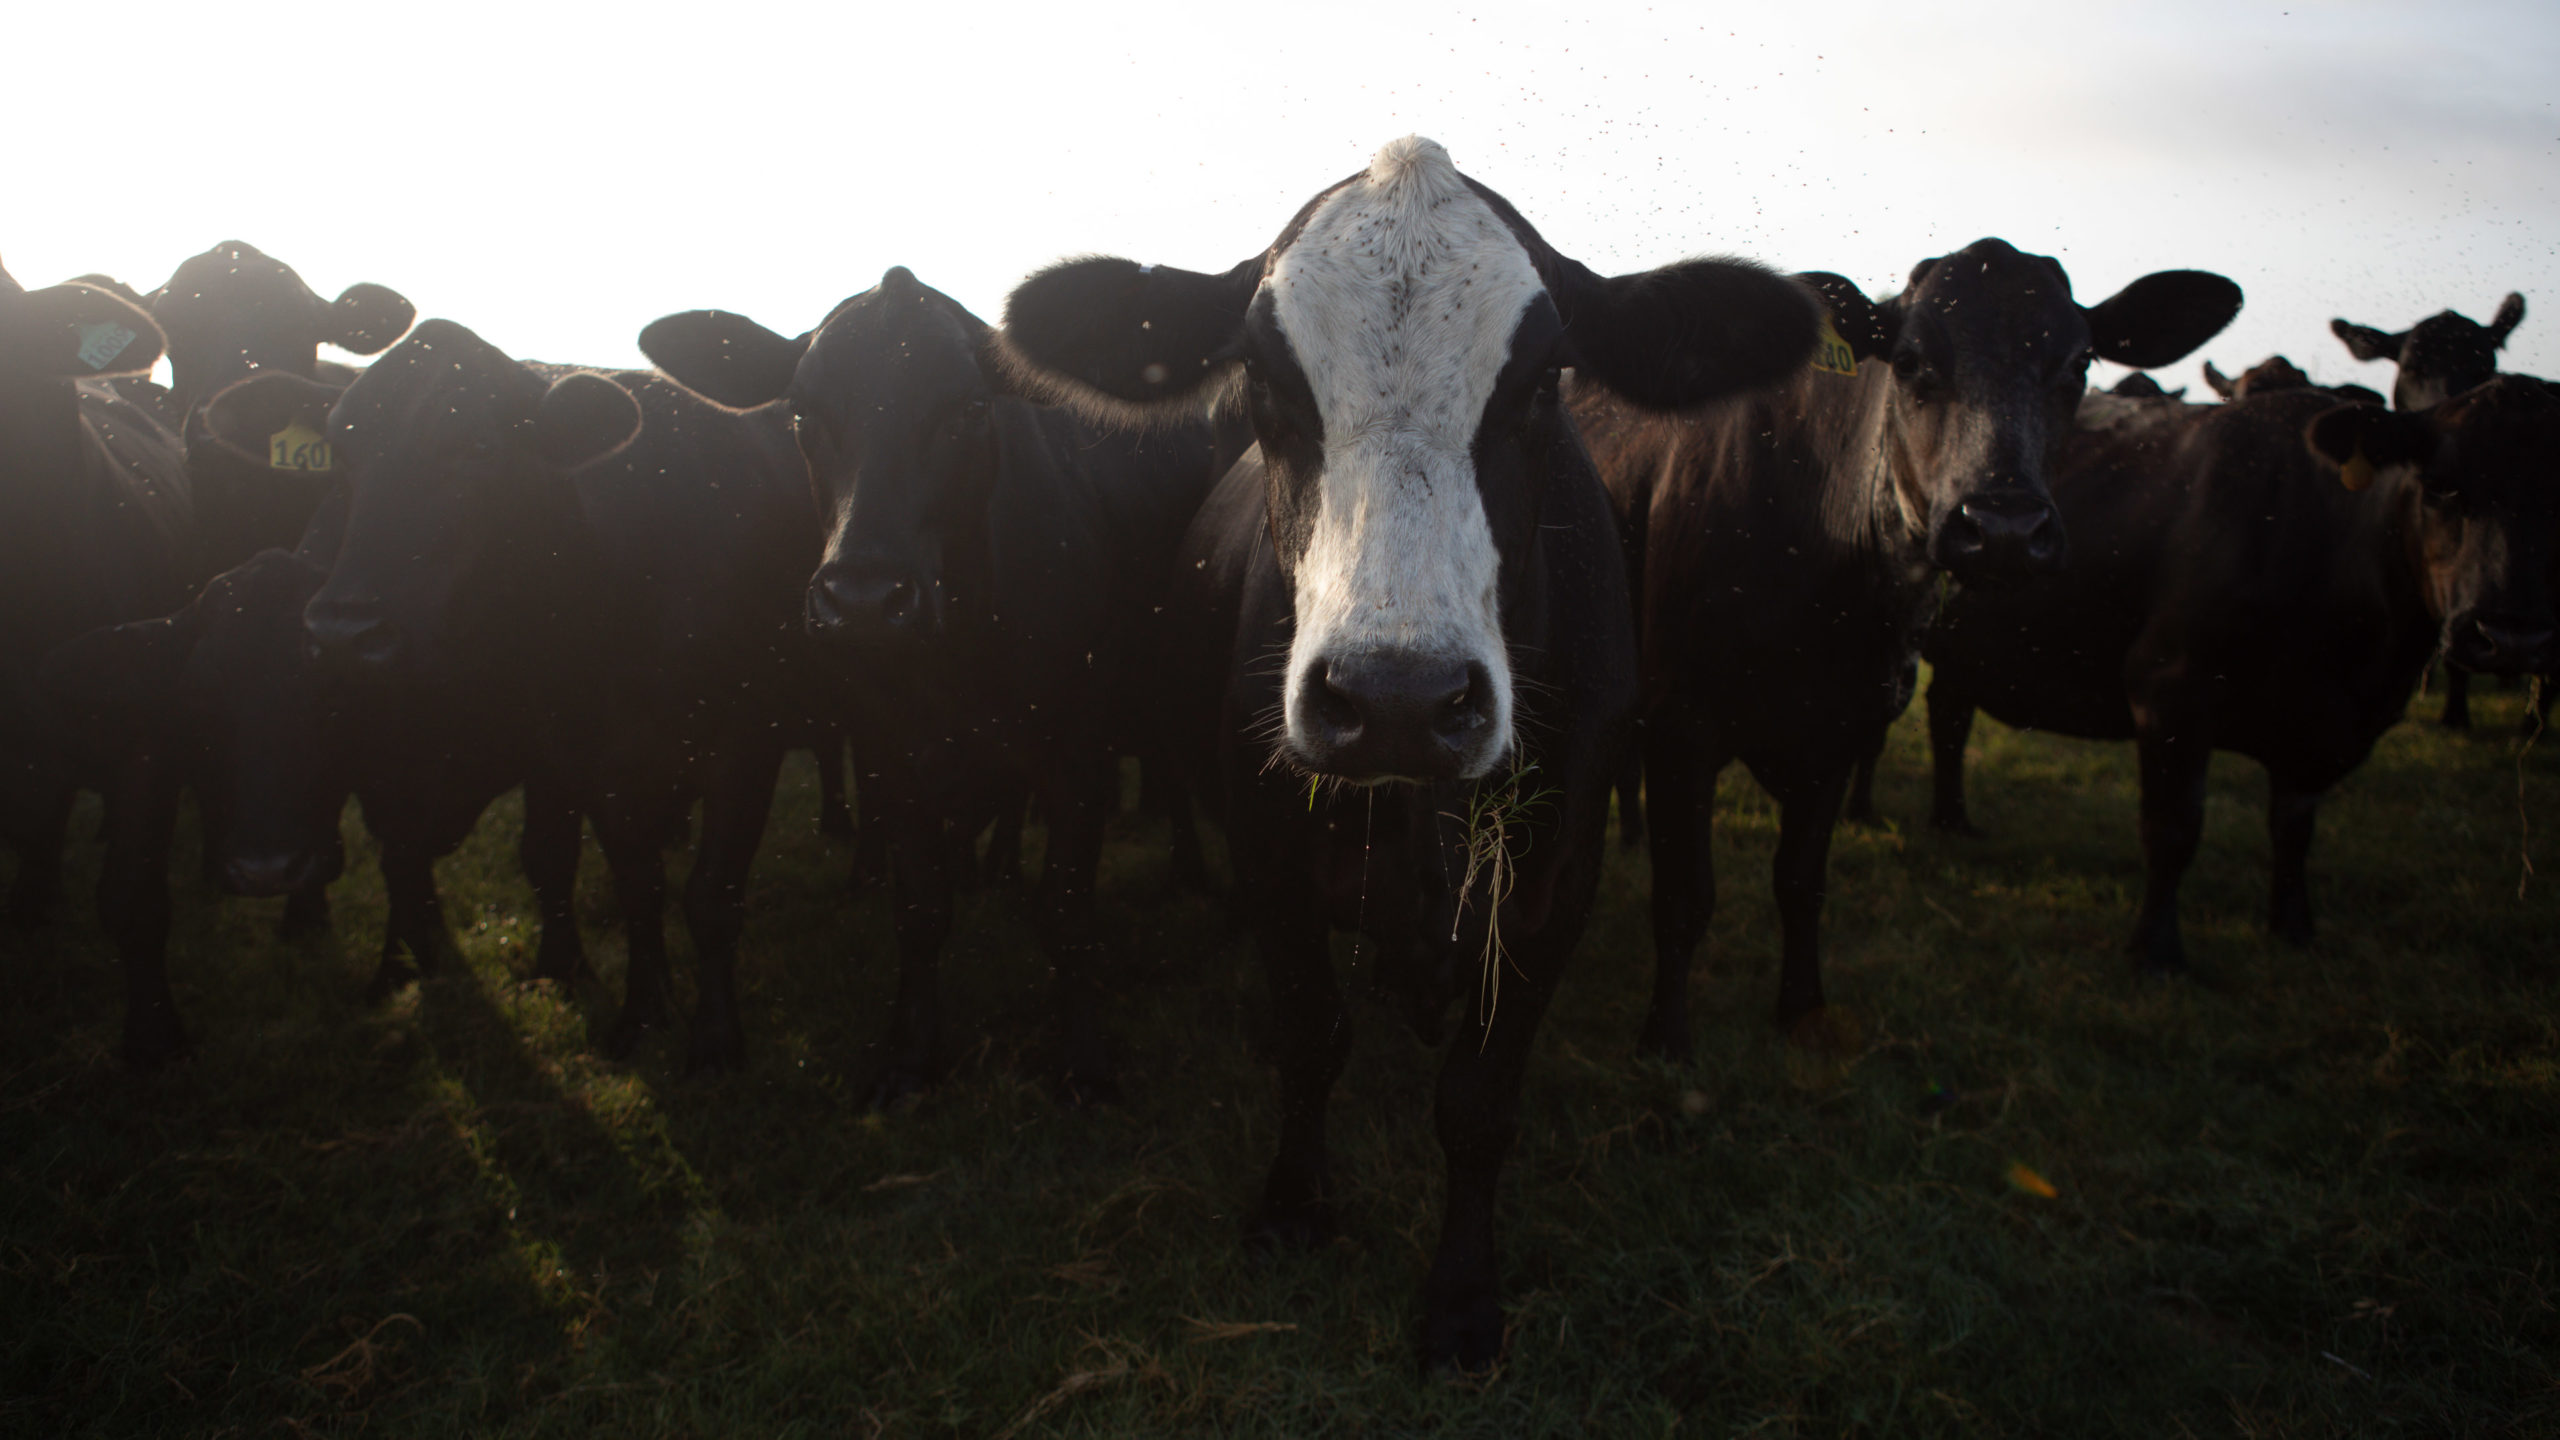 A herd of cattle standing together in a pasture